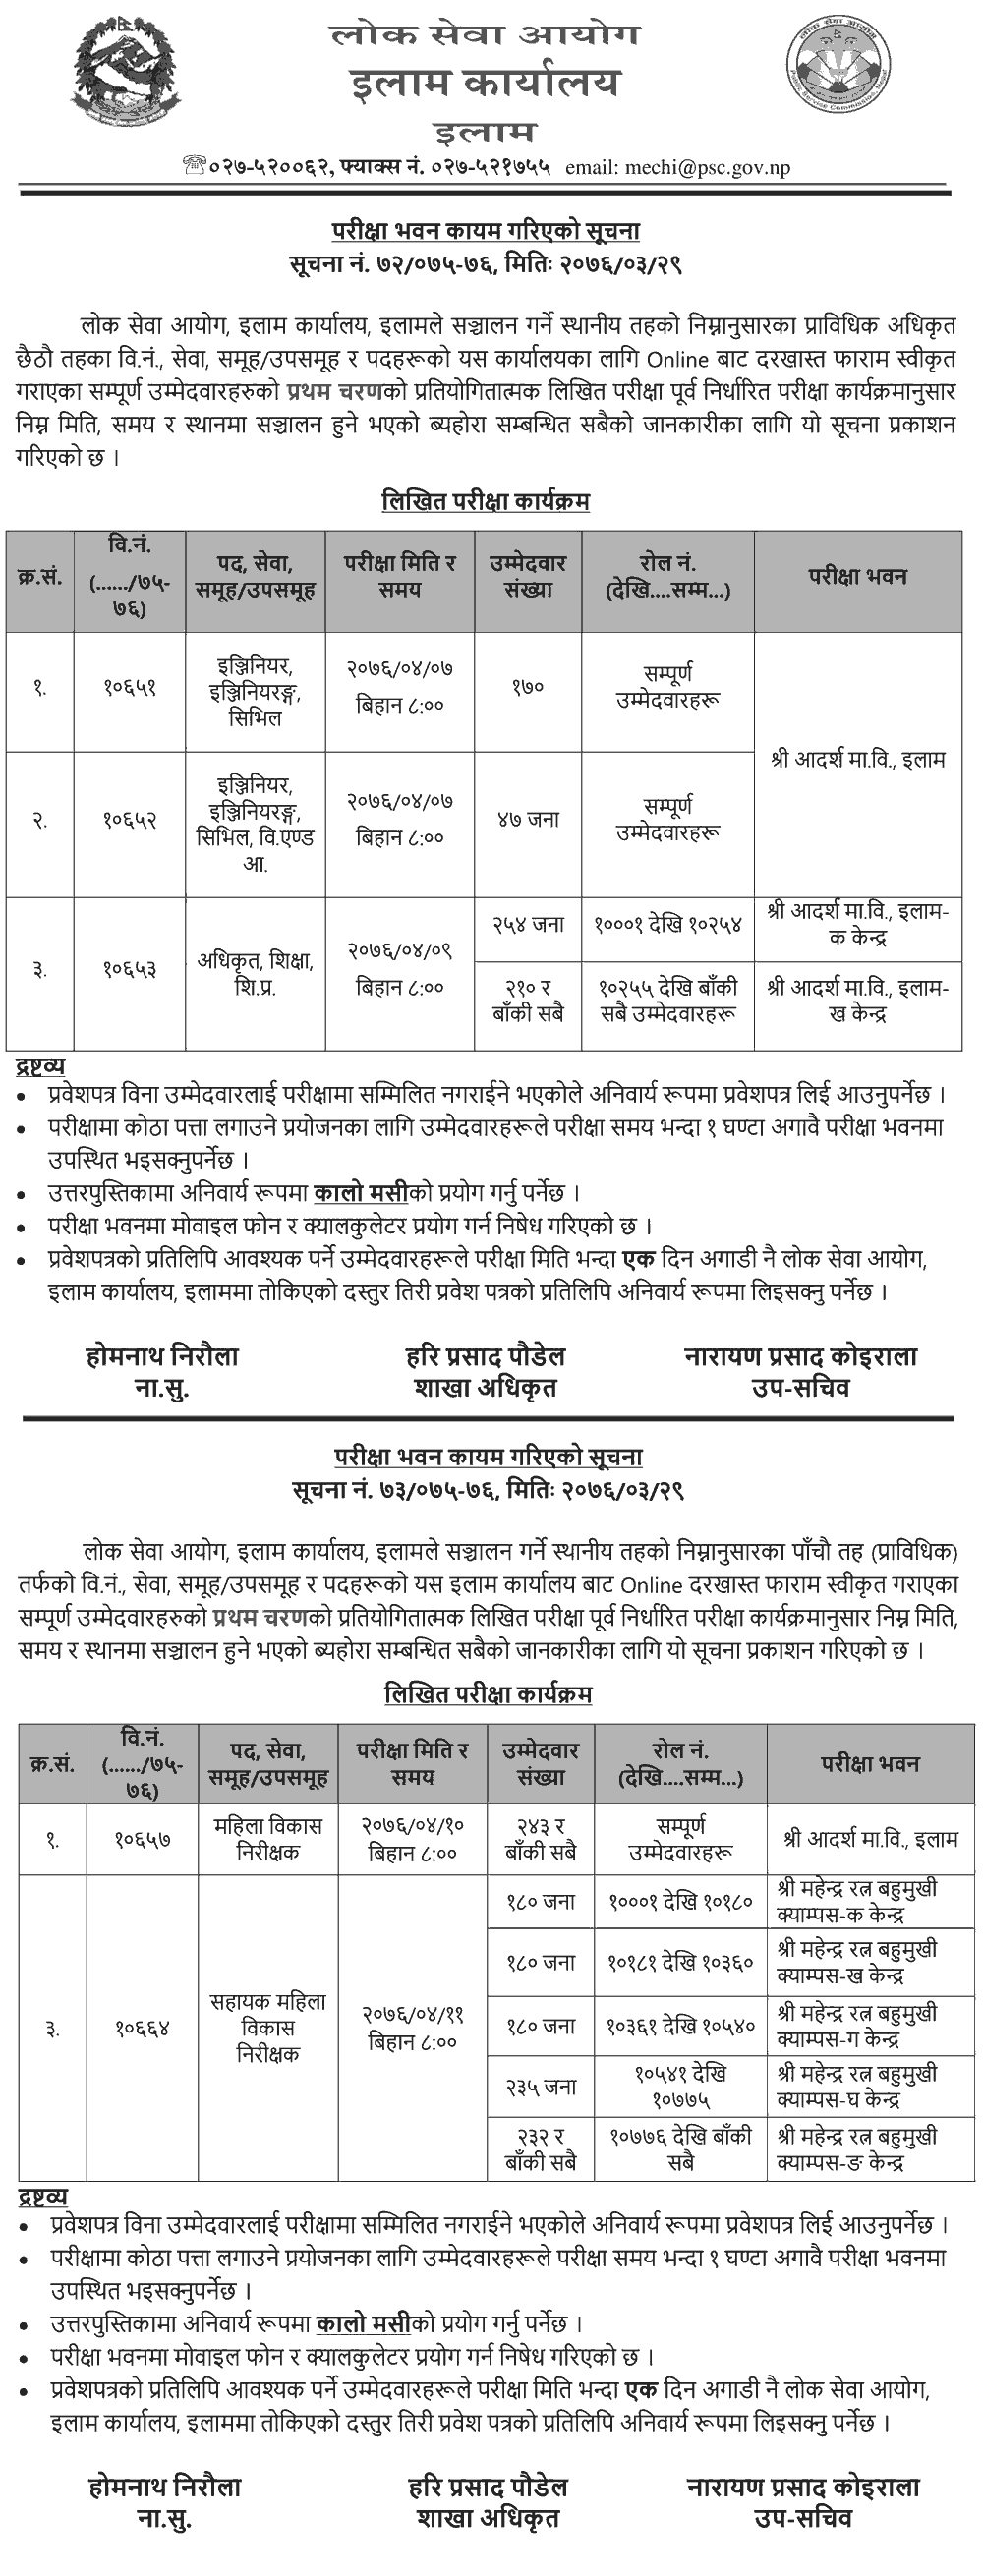 Local Level 5th and 6th Level Technical Written Exam Center - Ilam